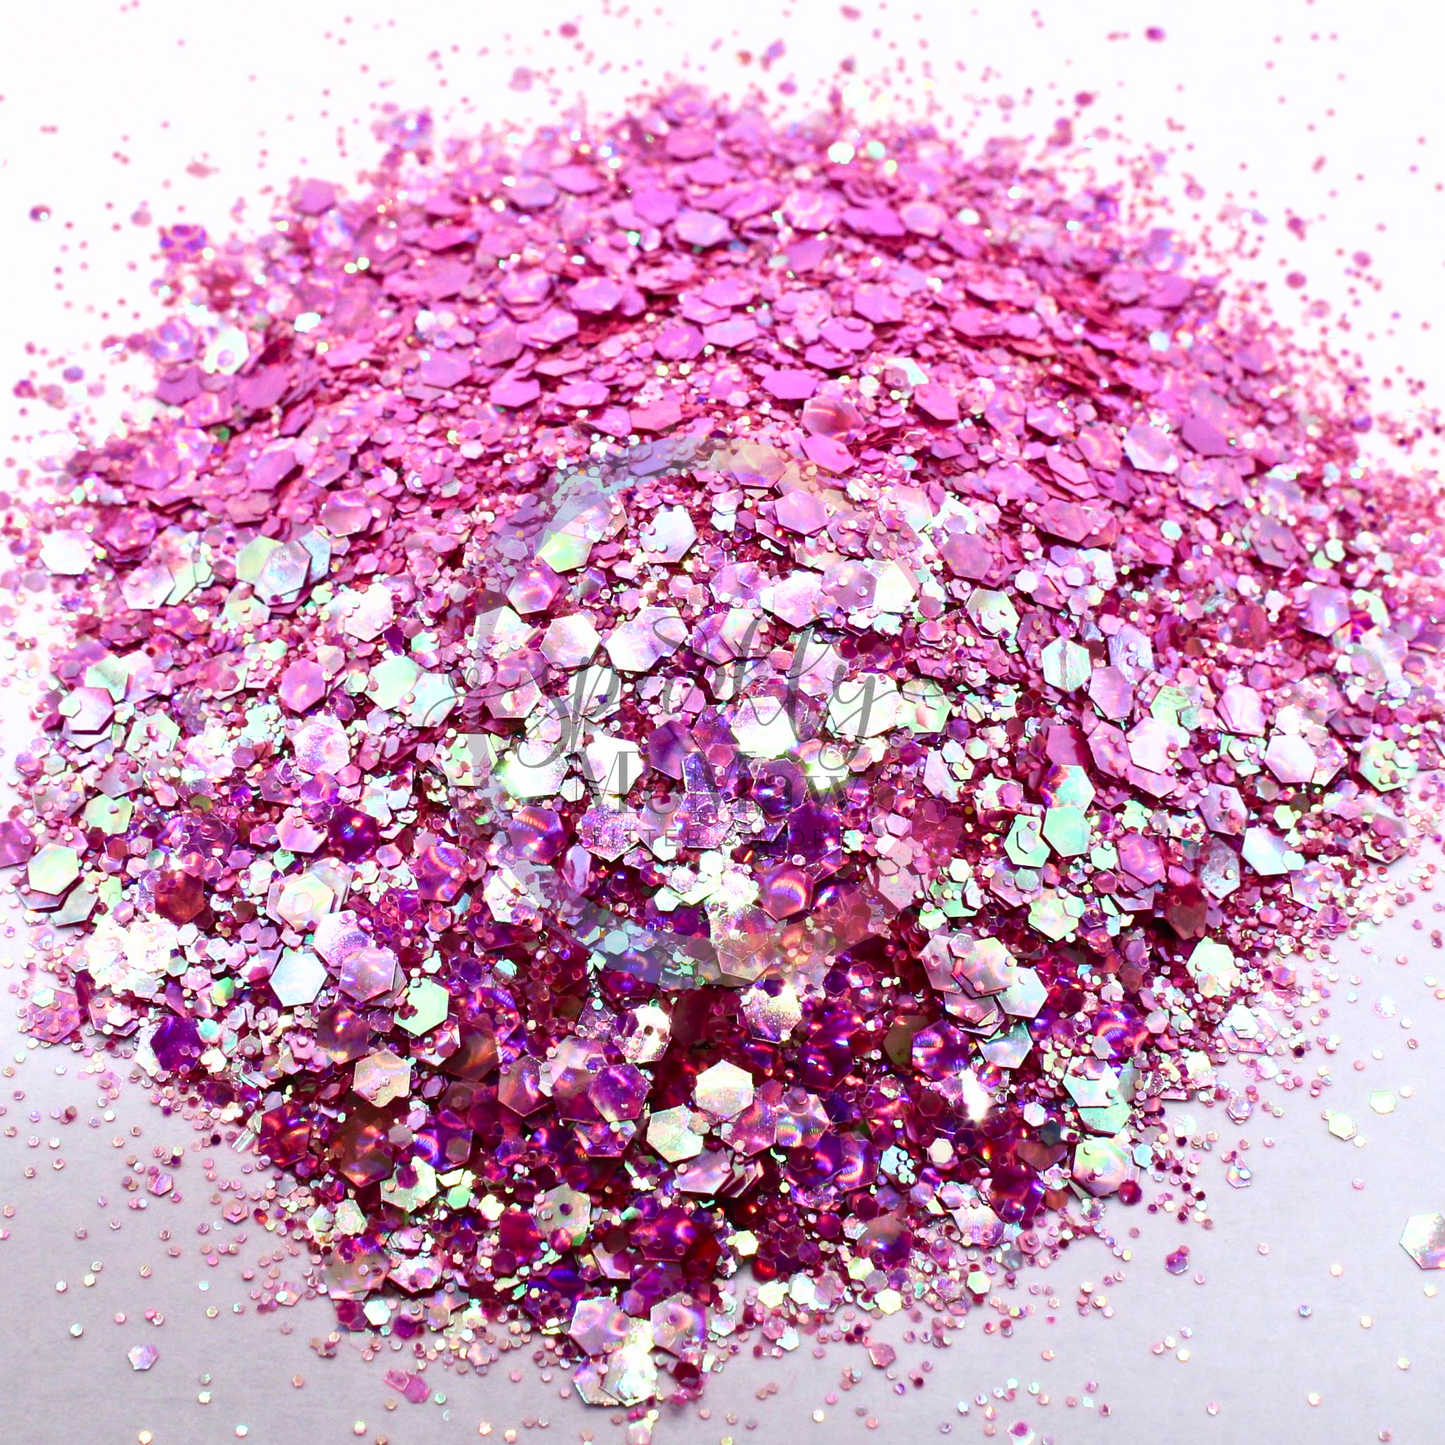 Fashionista 3D Holographic Color Shifting Glitter